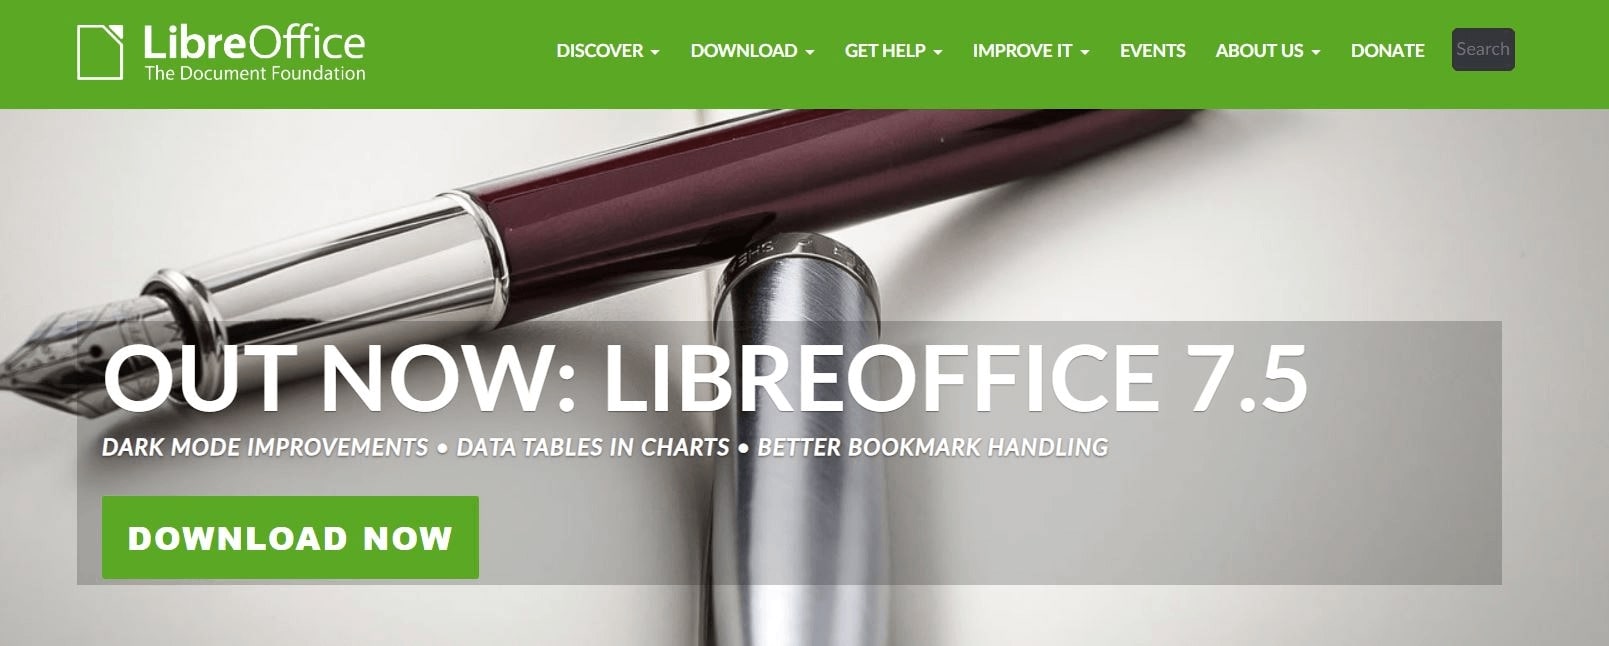 LibreOffice Overview